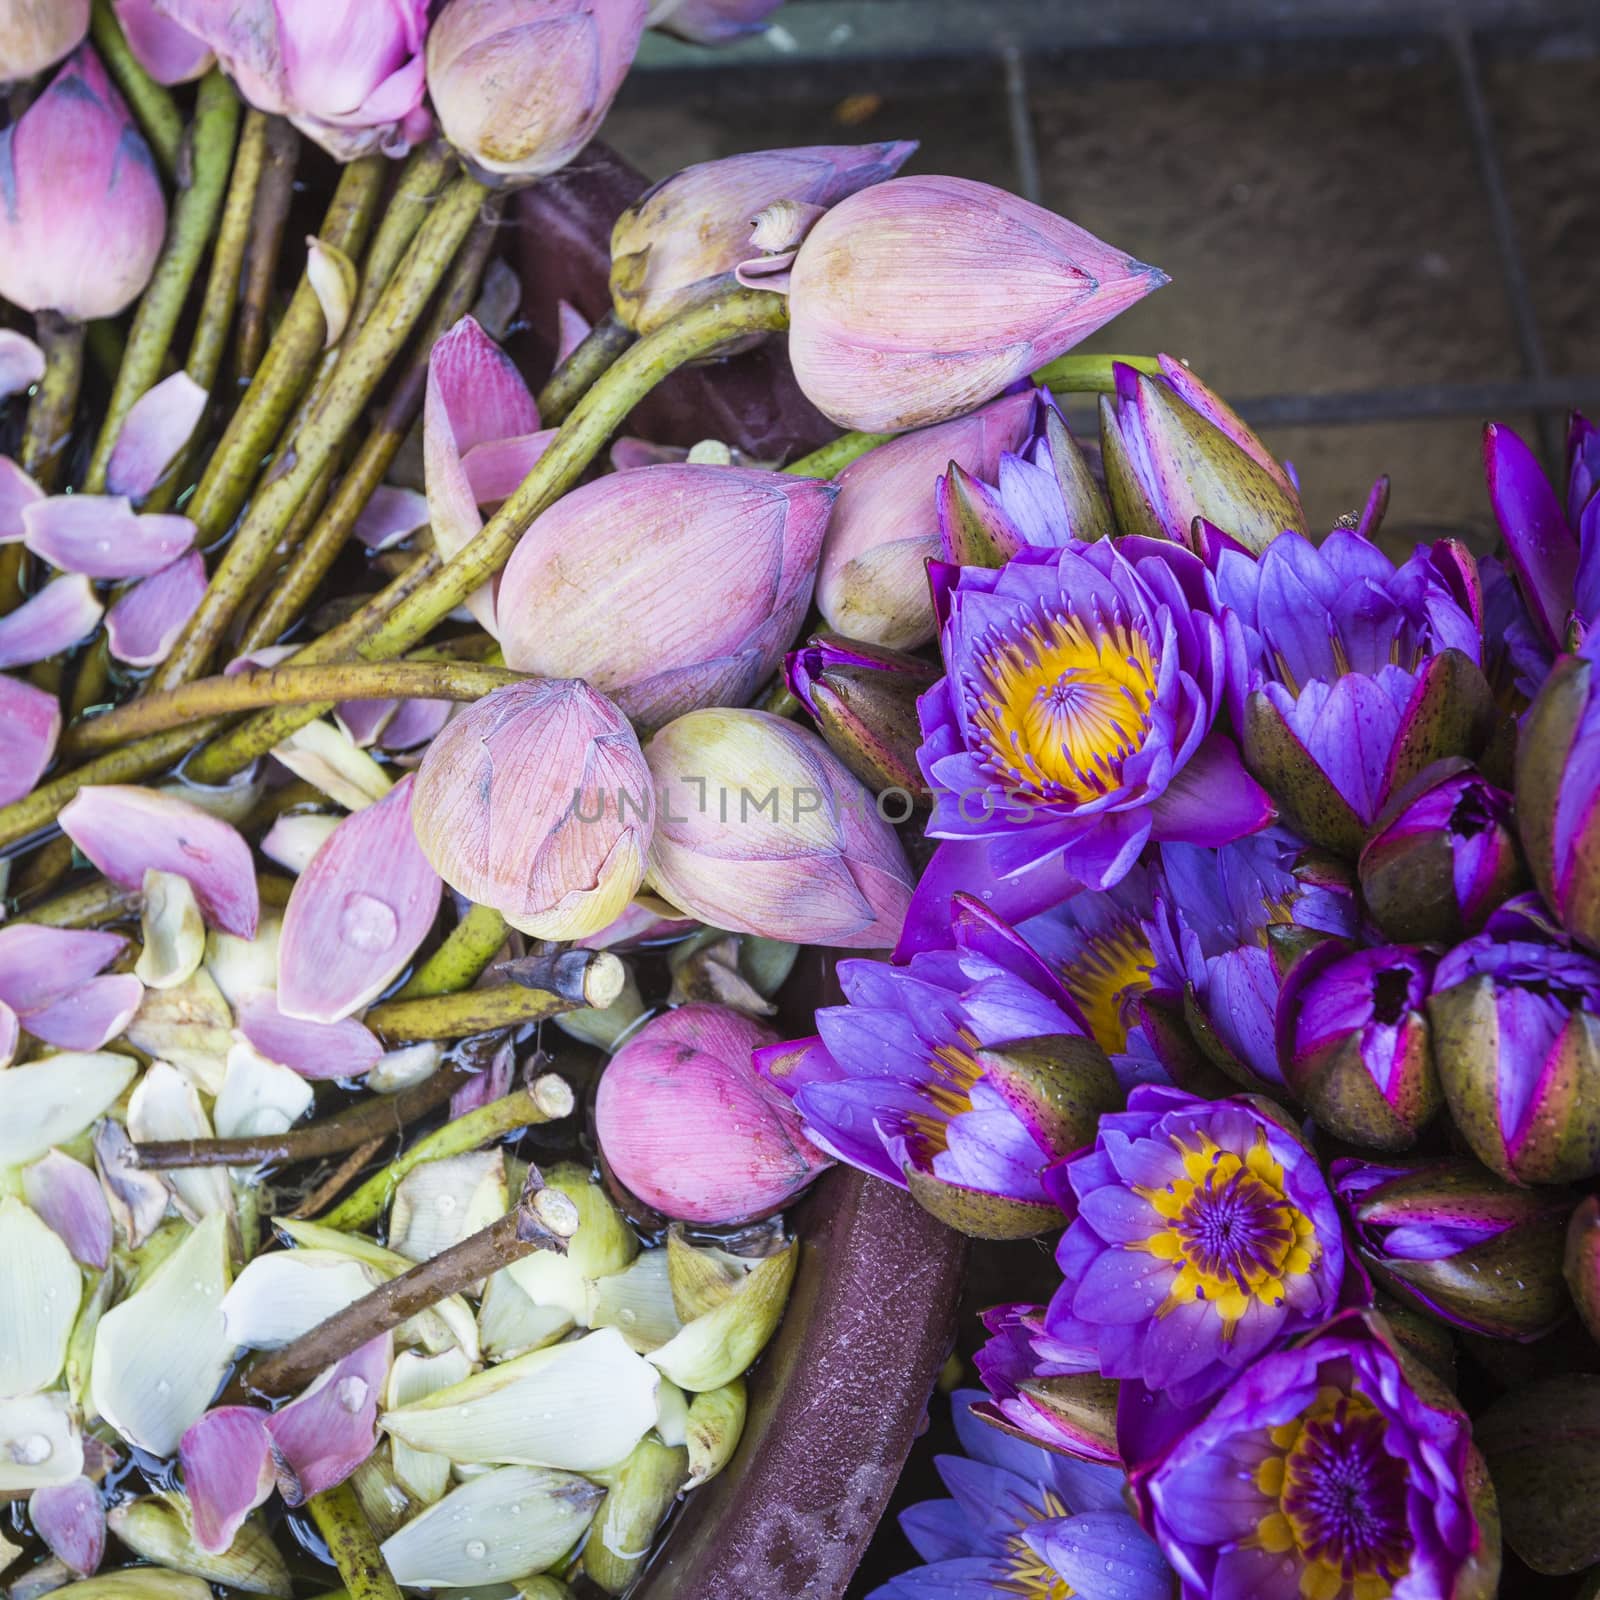 Flowers sold to be used as offerings in front of the Temple of the Tooth Relic in Kandy (Sri Lanka).